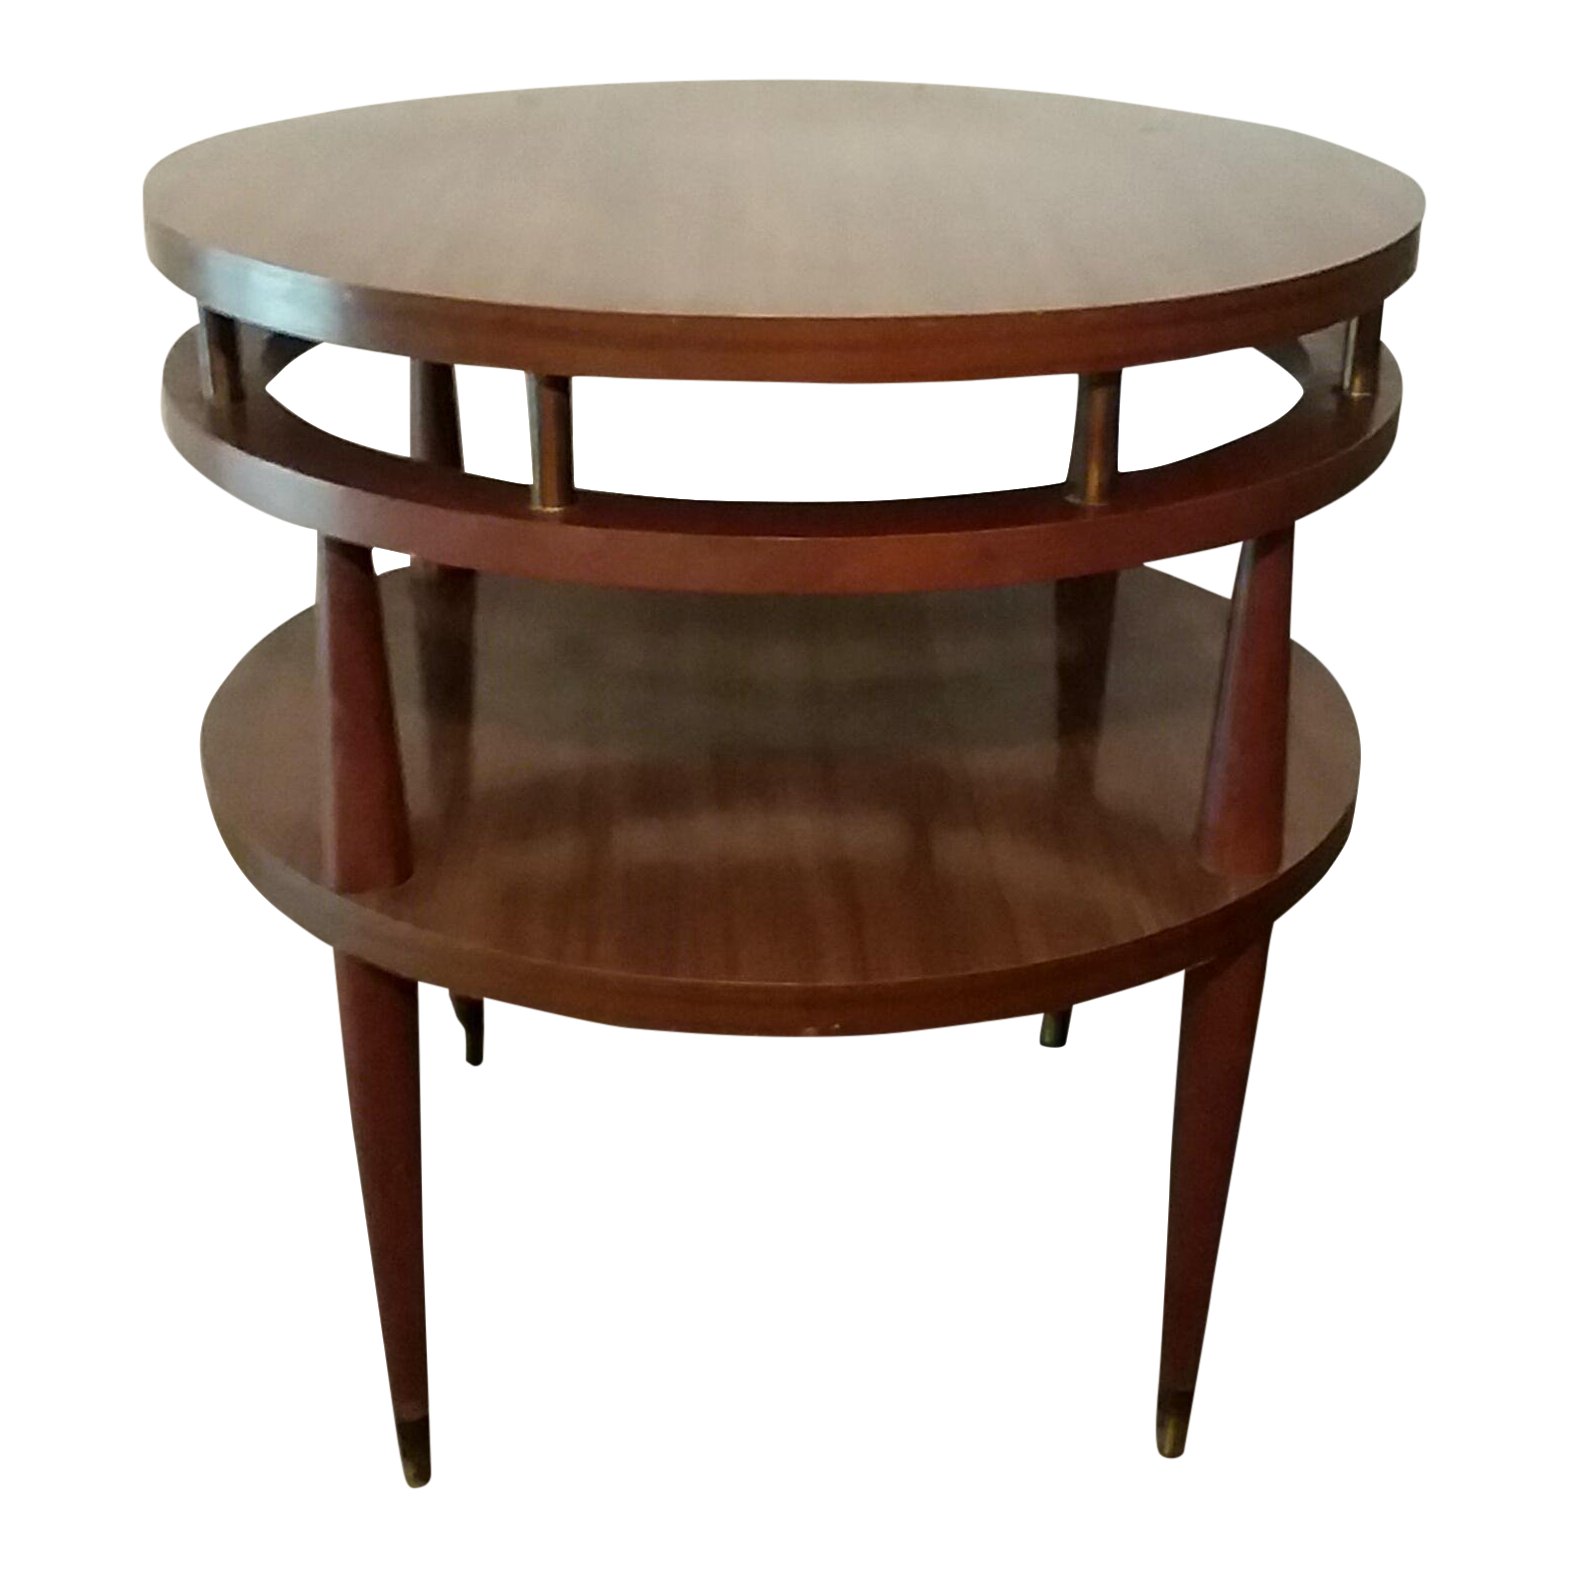 mid century modern round accent table chairish cabinet bookshelf pier one seat cushions side tables for living room with storage crosley furniture outdoor coffee ideas pub style